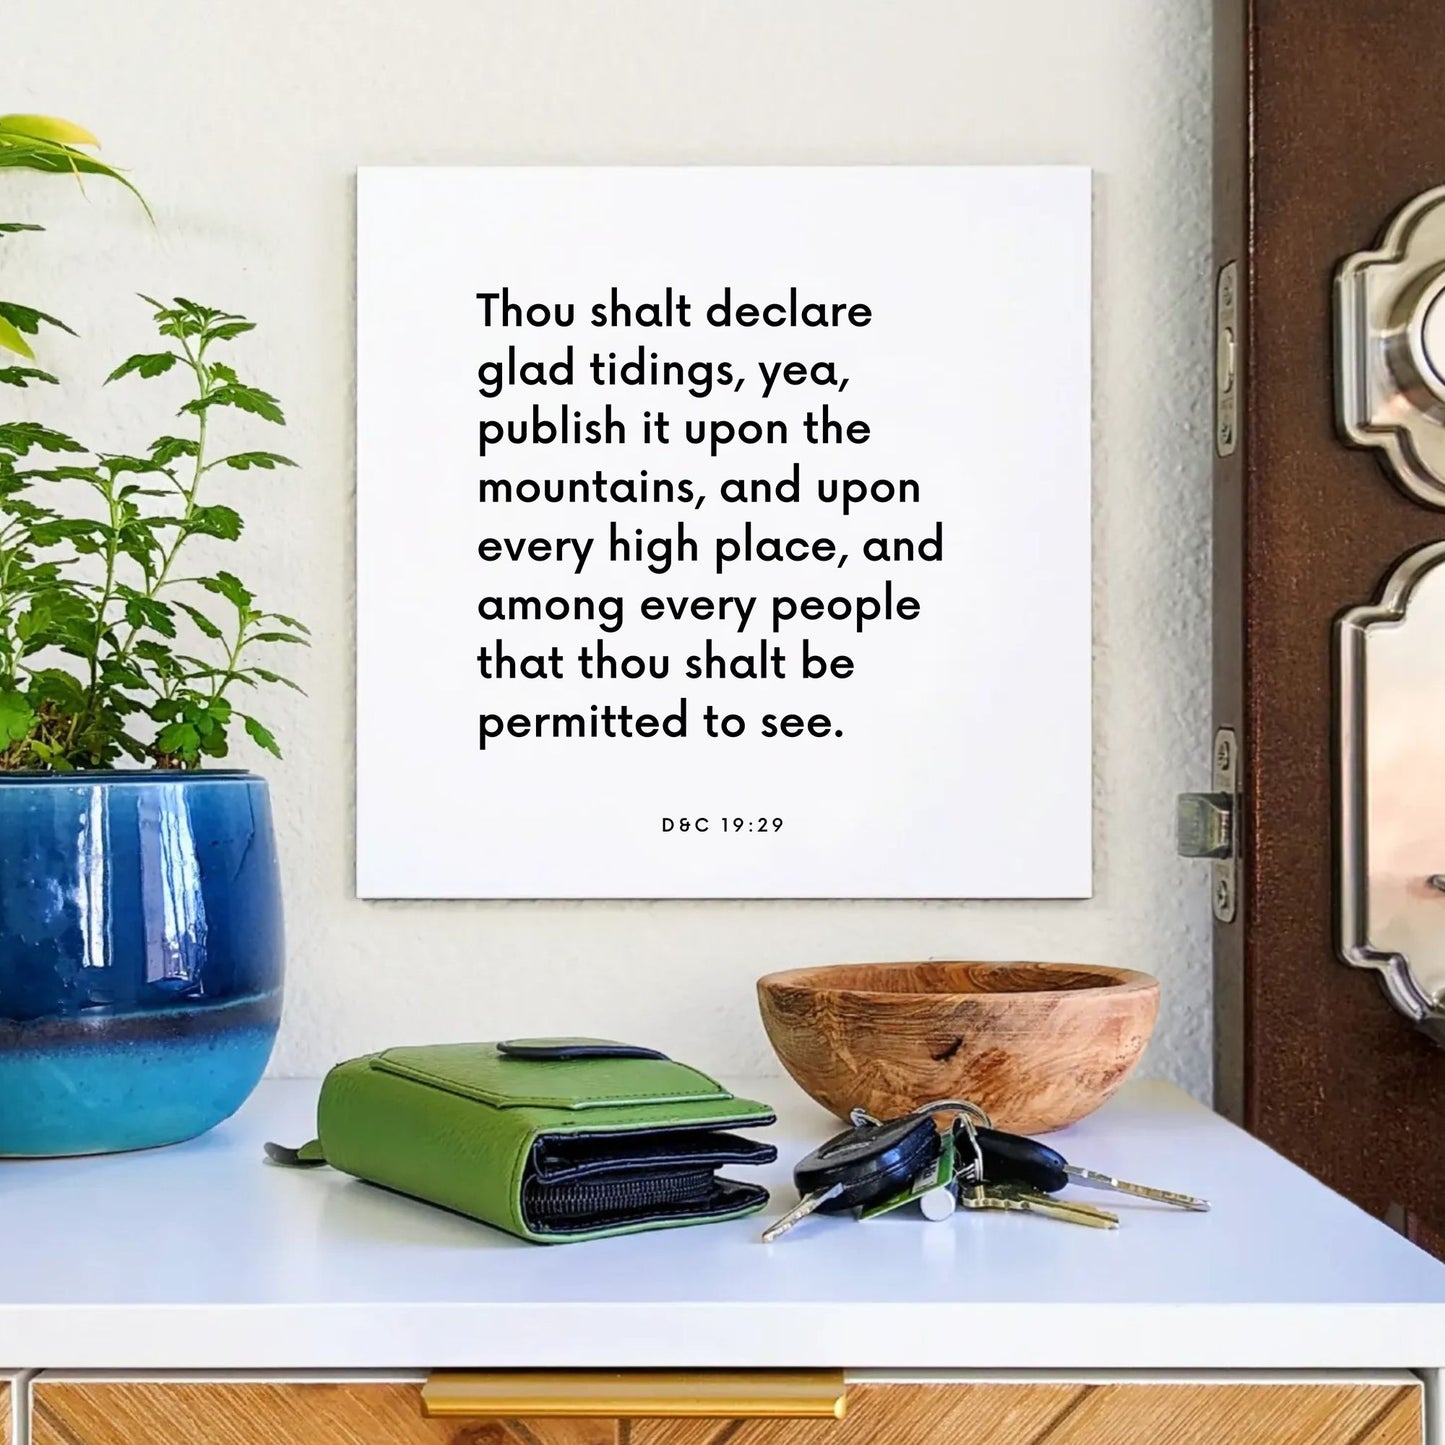 Entryway mouting of the scripture tile for D&C 19:29 - "Thou shalt declare glad tidings among every people"